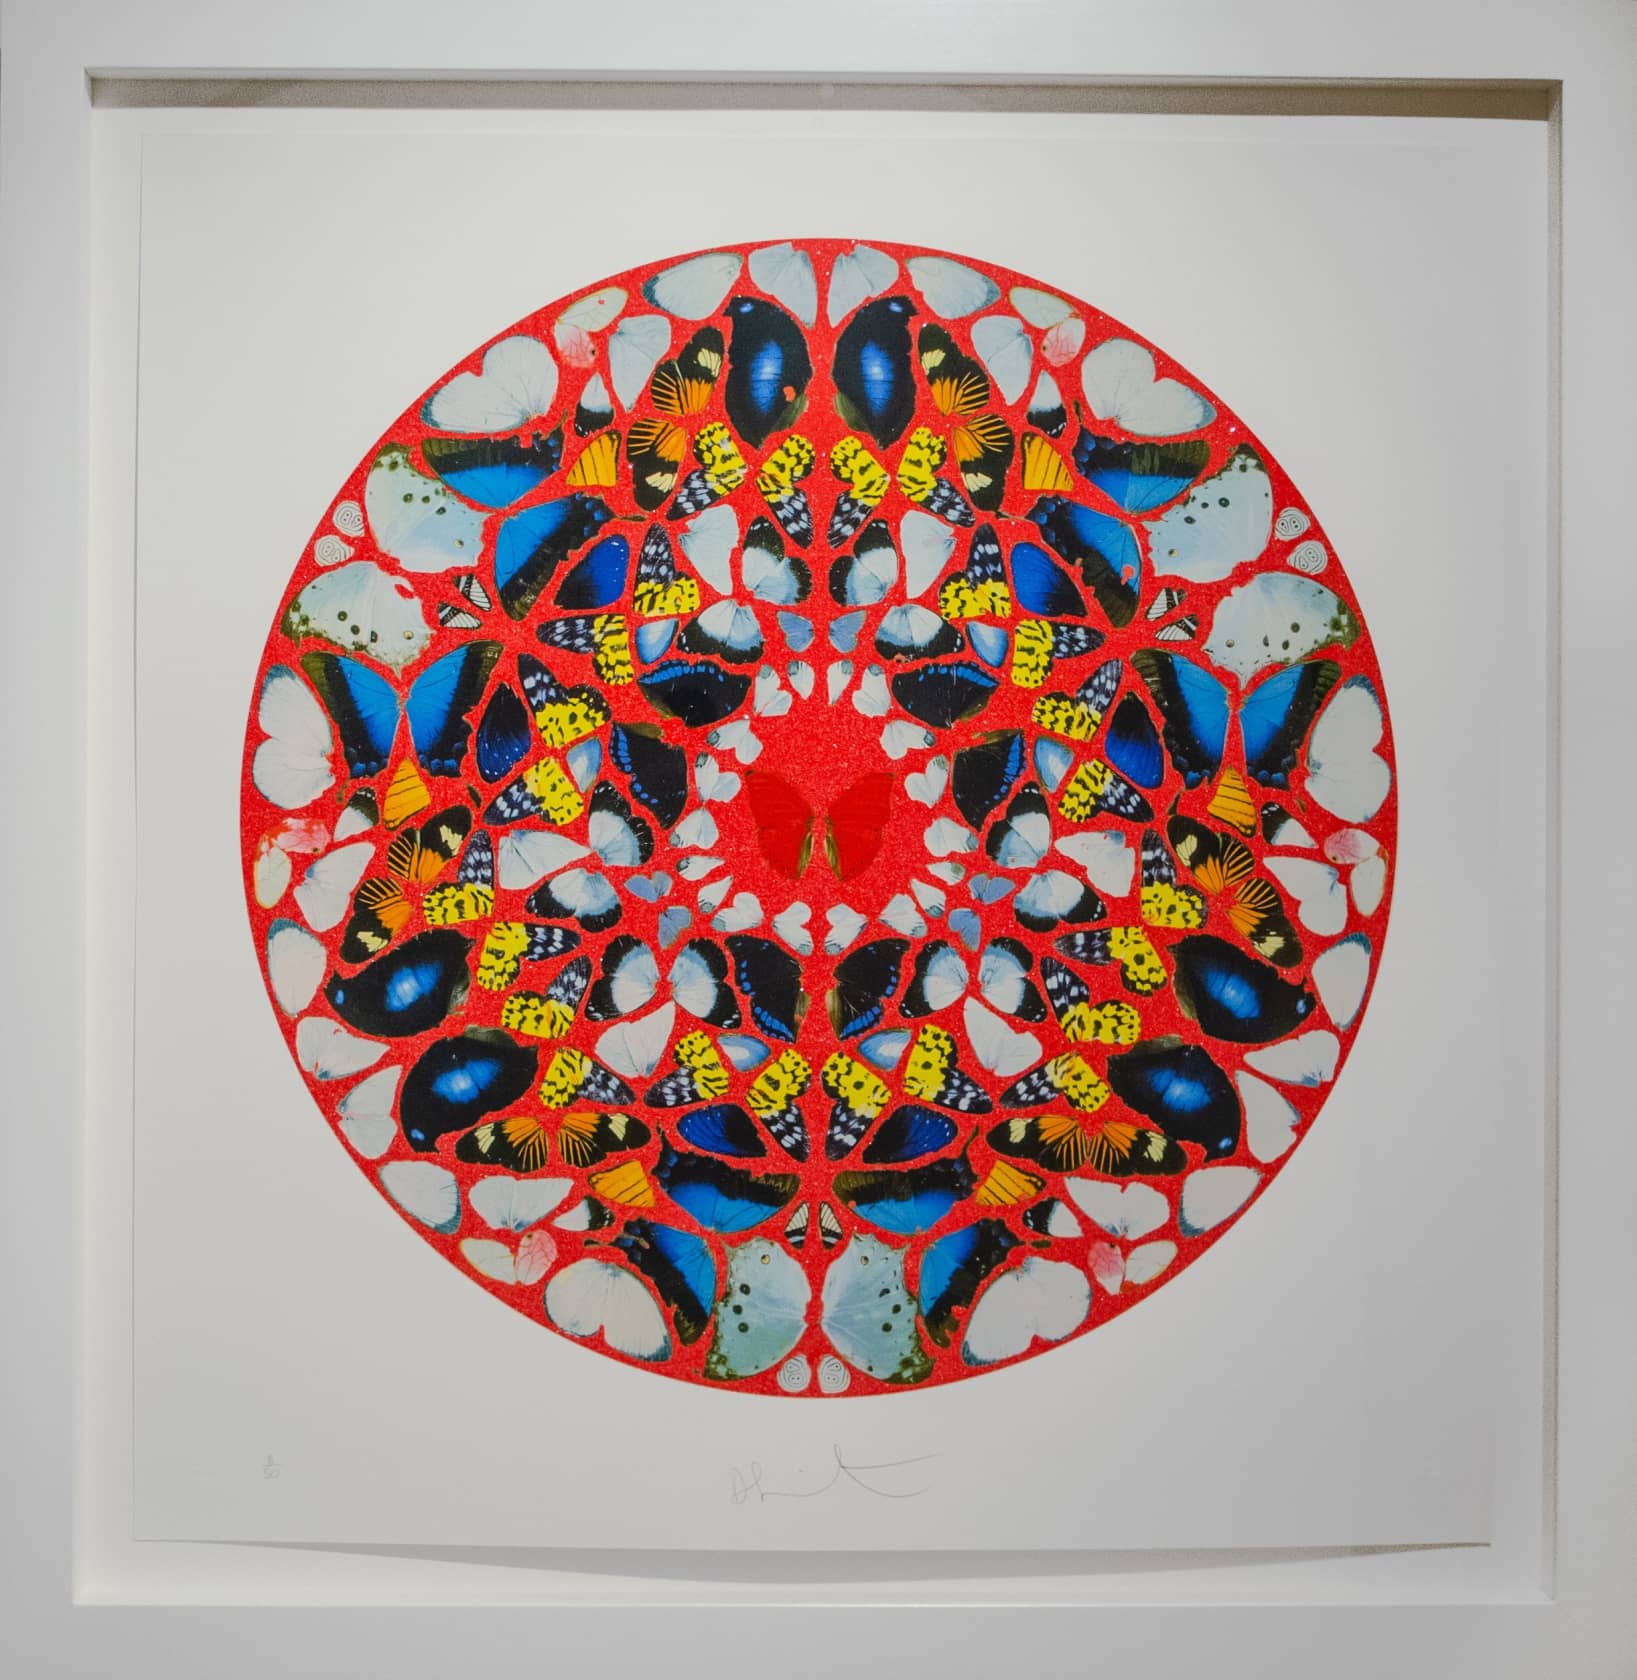 Damien Hirst, Psalm Domine Fuore, 2010